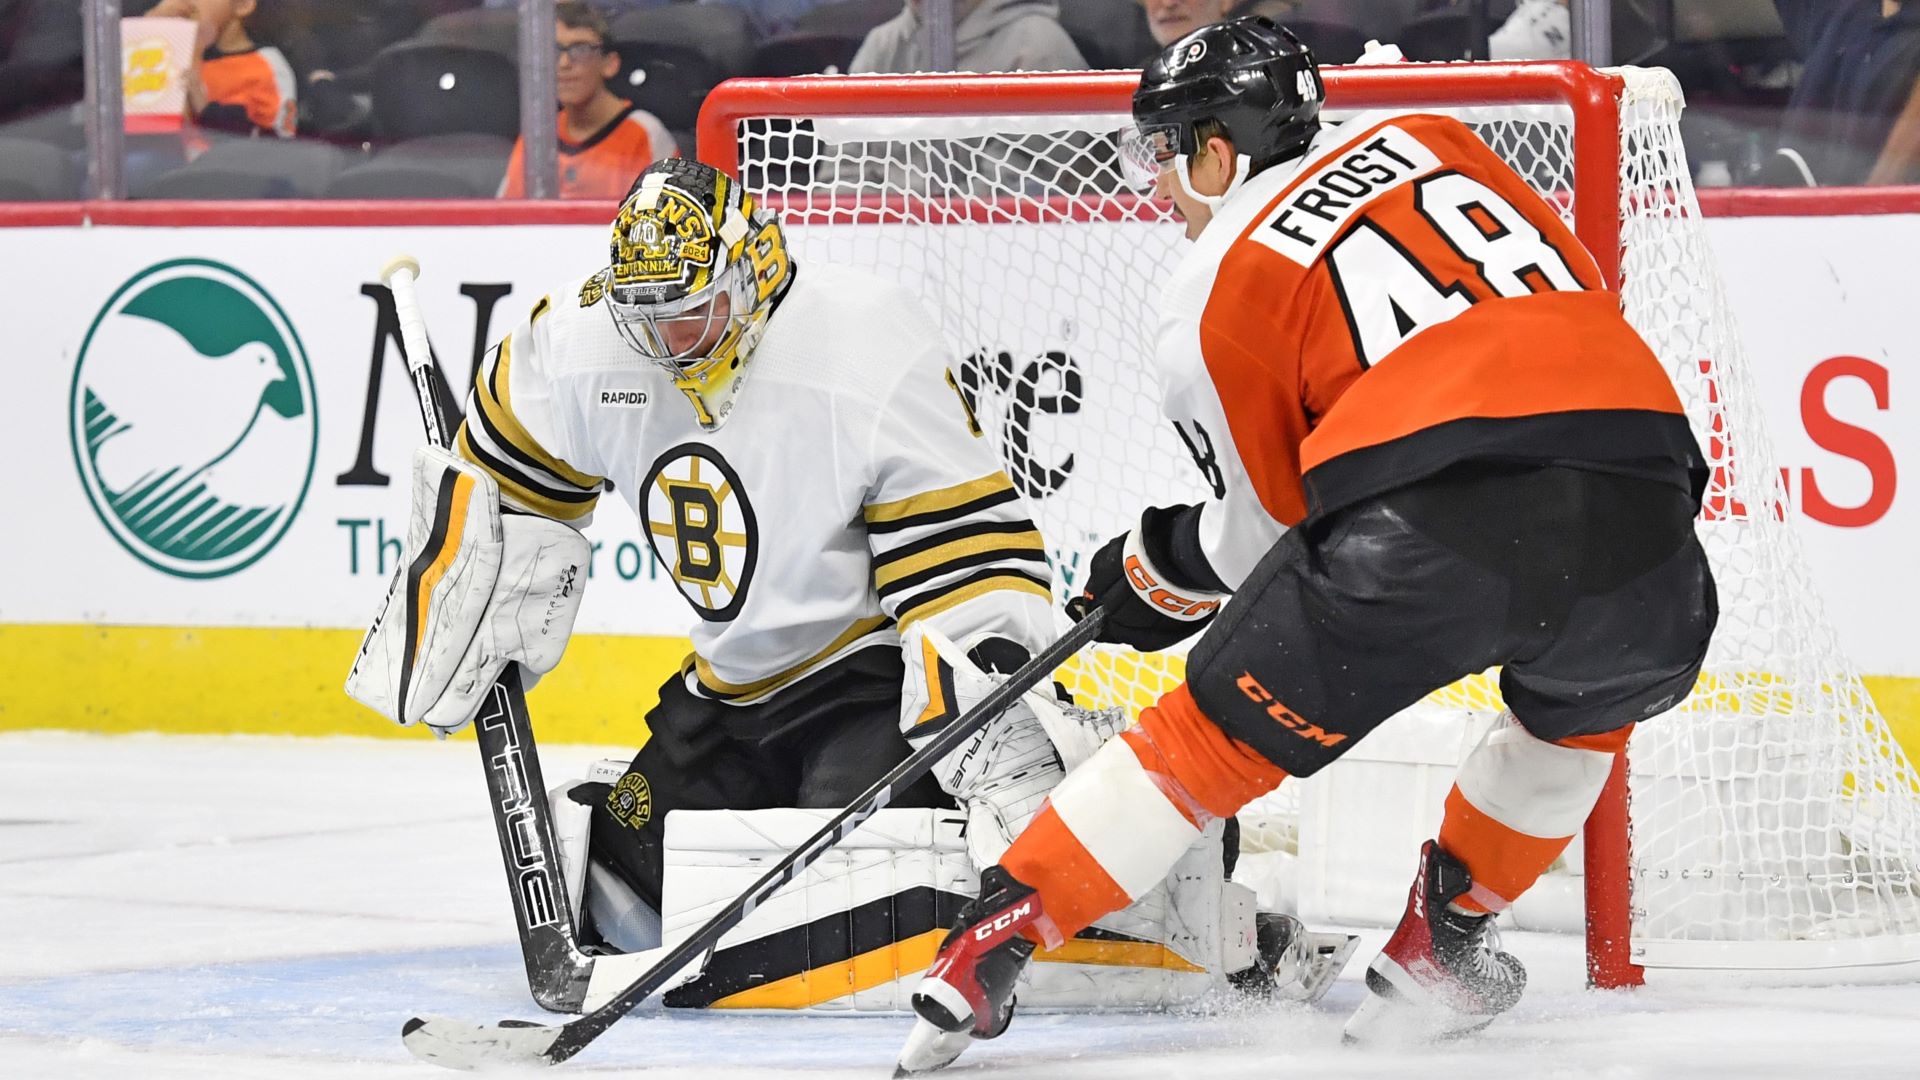 Same problems plague Flyers in blowout loss to Bruins – The Morning Call